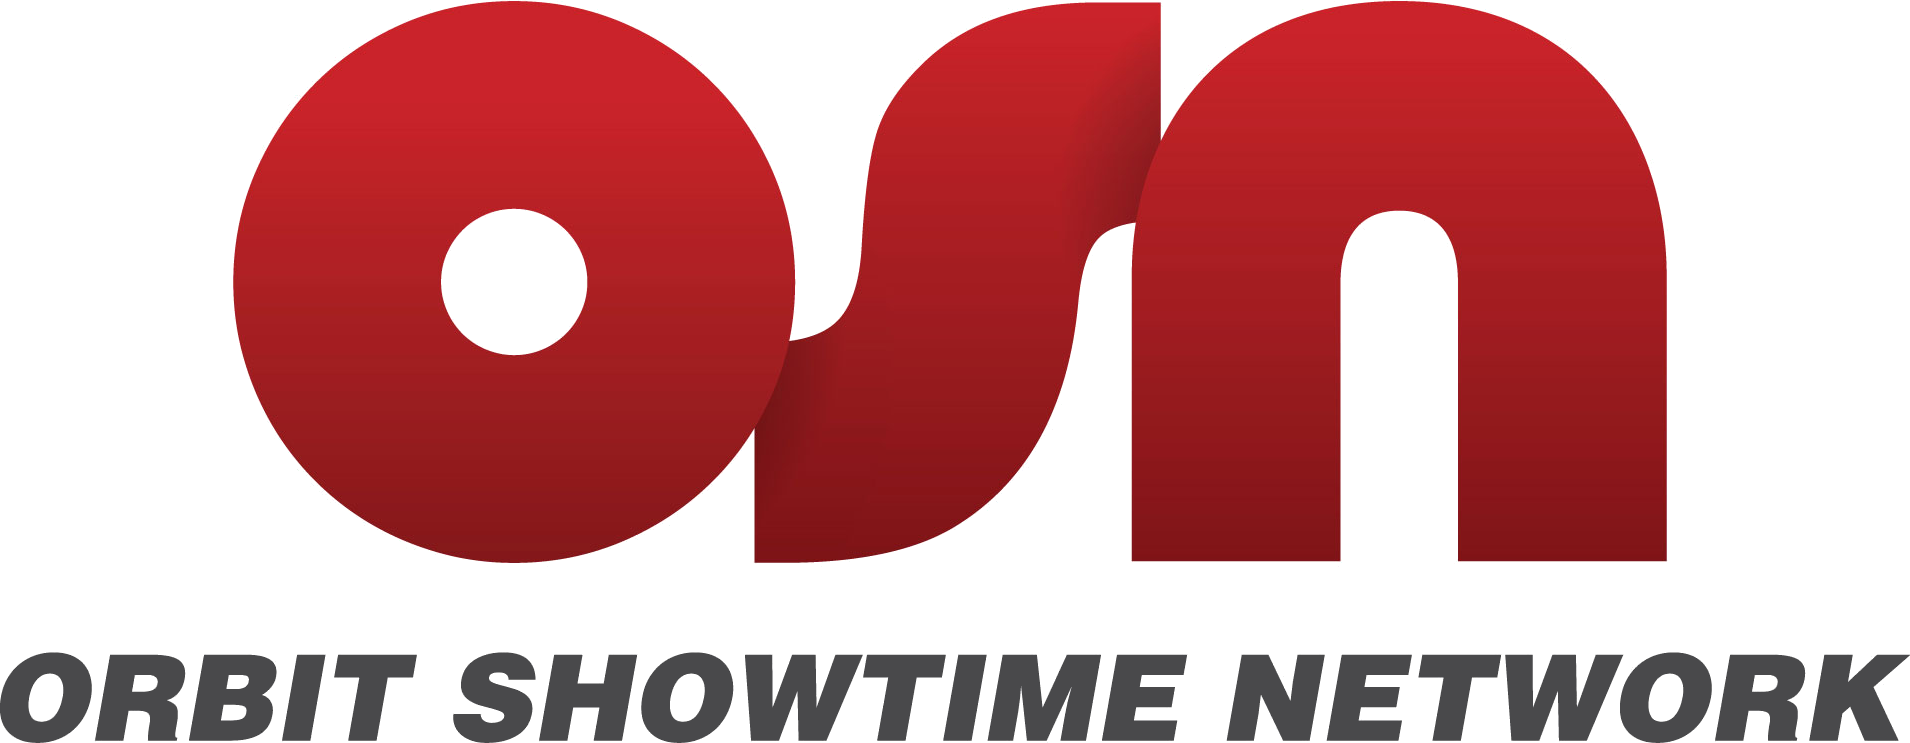 OSN Sports network broadcasting the World cup live in Mena countries